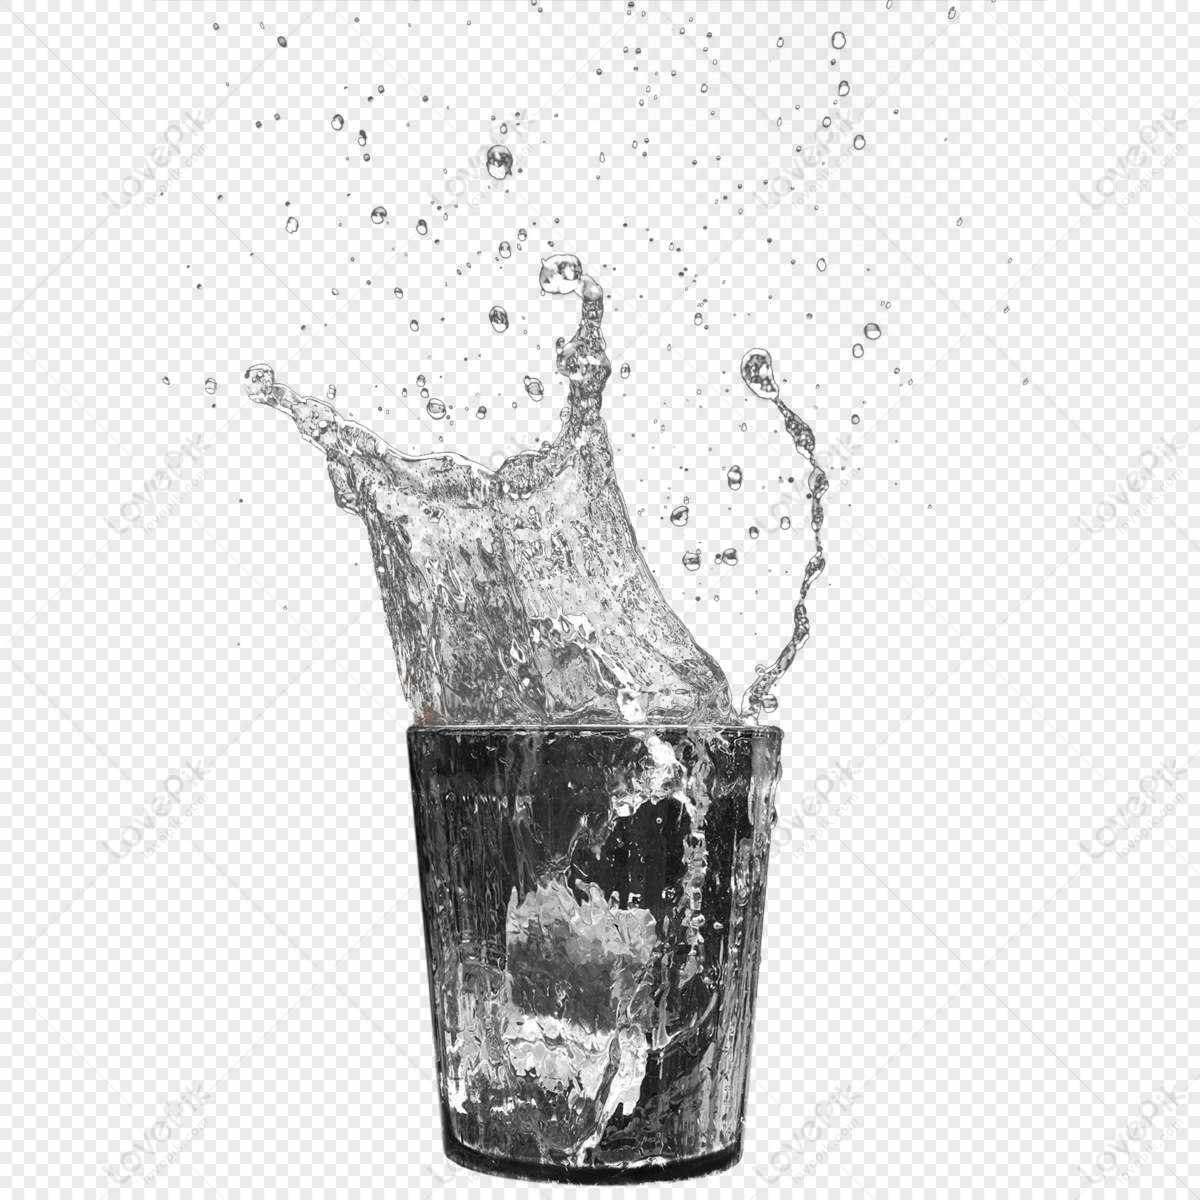 Black Line Drawing Hand Drawn Drink Elements,sketch,water Cup PNG Image  Free Download And Clipart Image For Free Download - Lovepik | 380114041